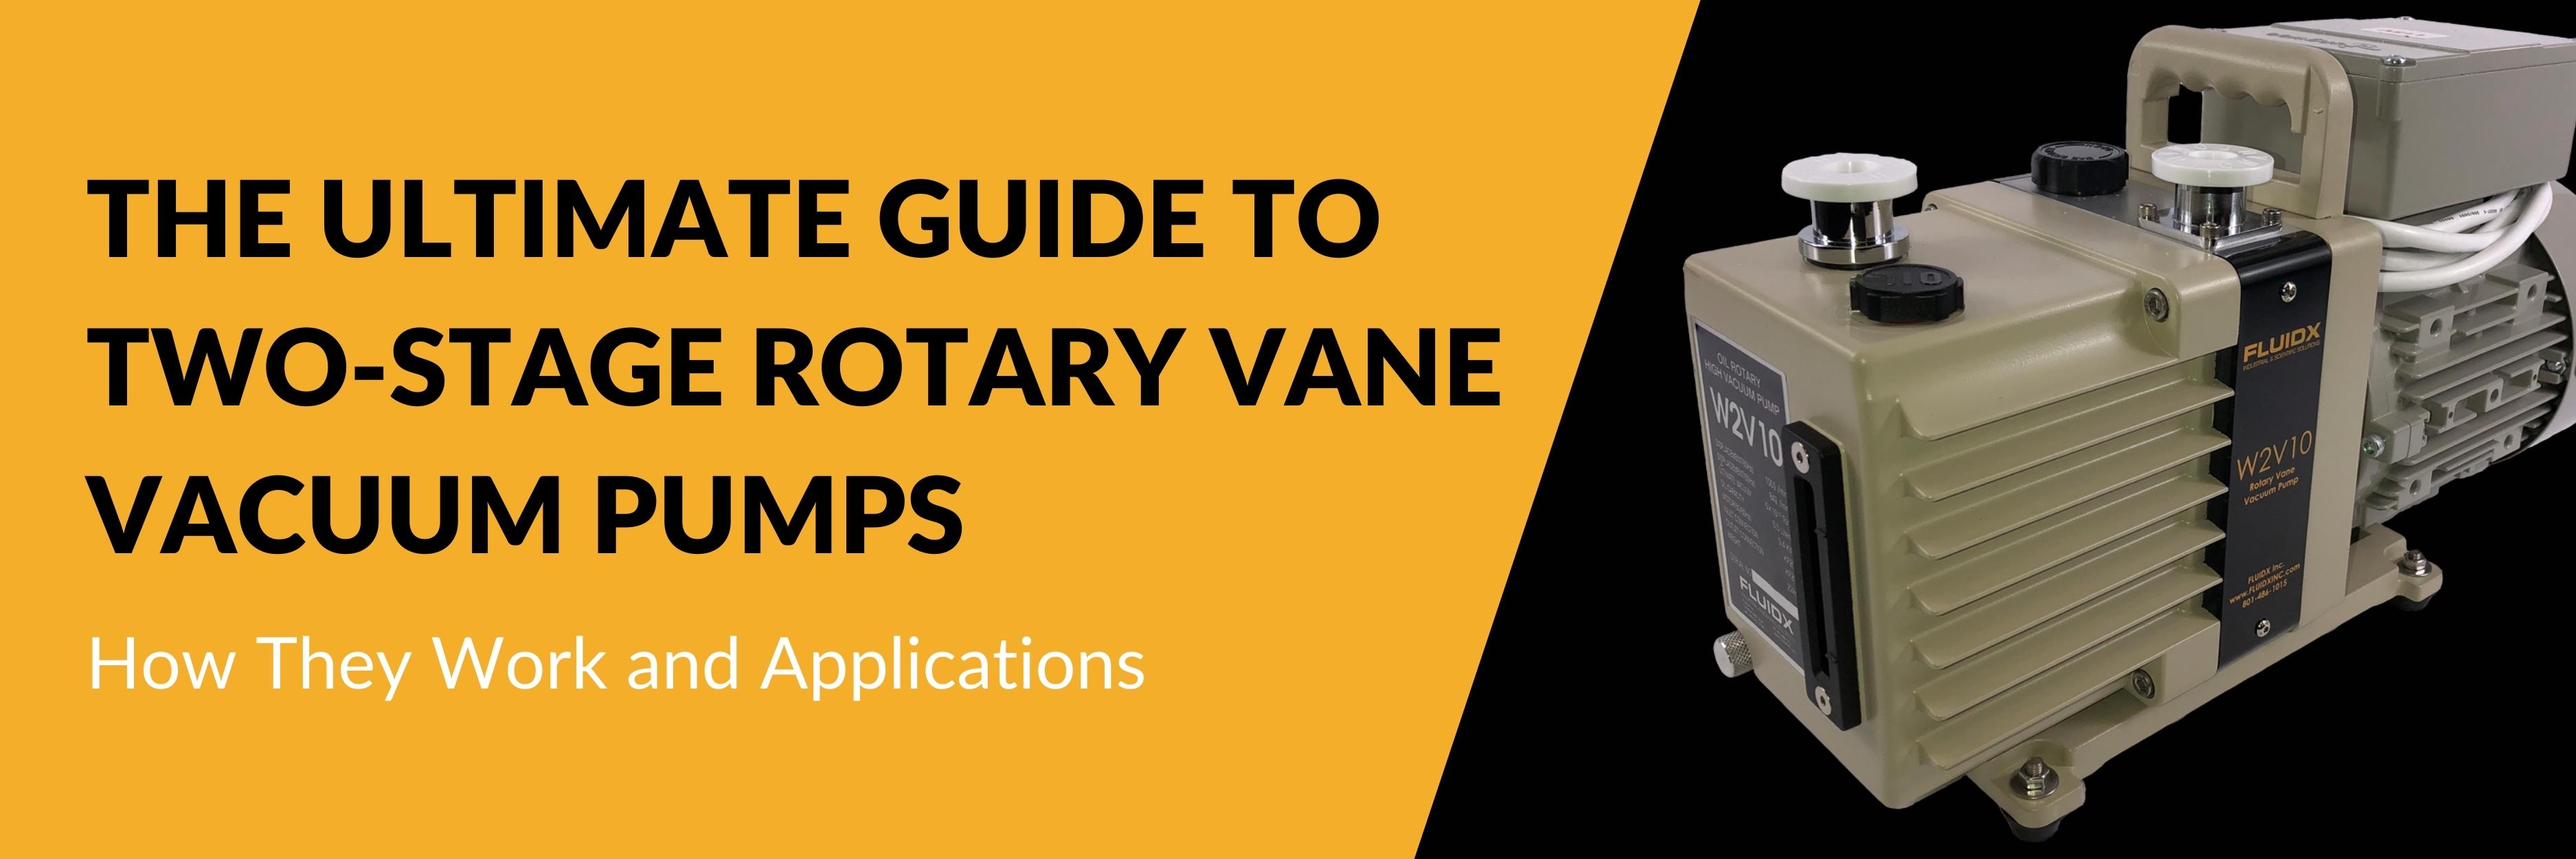 The Ultimate Guide to Two-Stage Rotary Vane Vacuum Pumps: How They